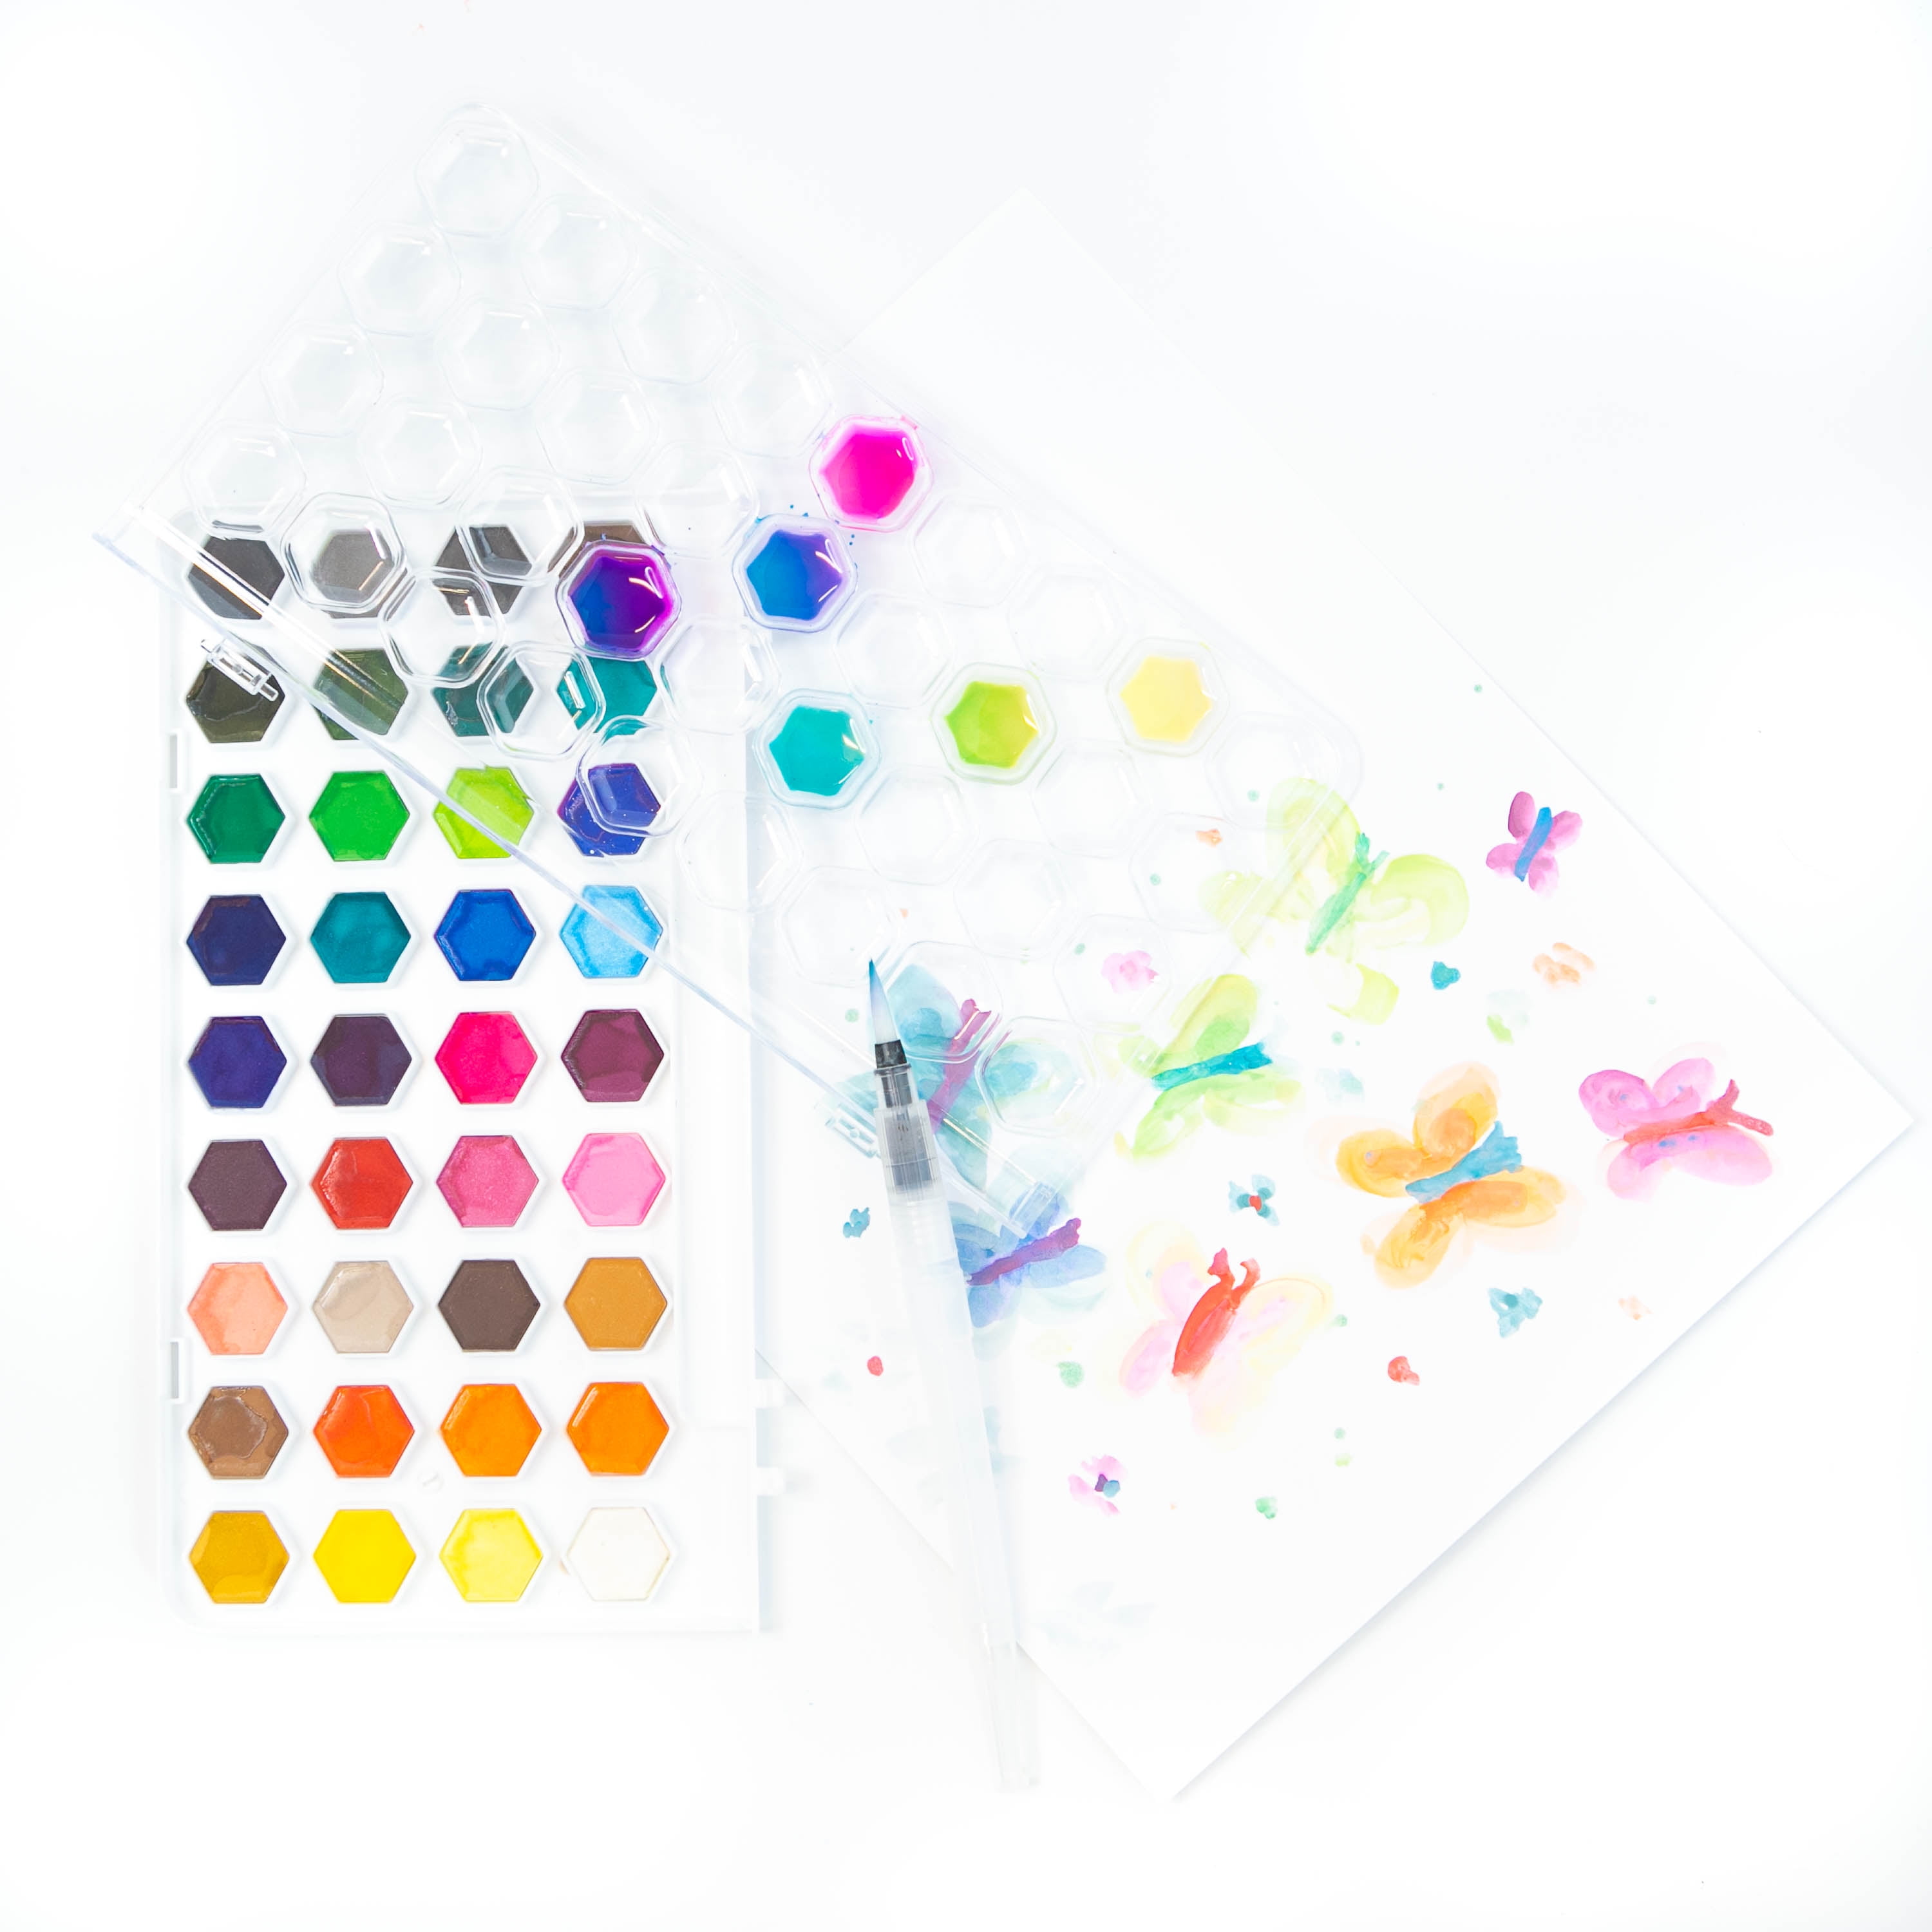 Hello Hobby Watercolor Paint Hexagon Palette, 36 Cakes with Paint Brush,  #40097 